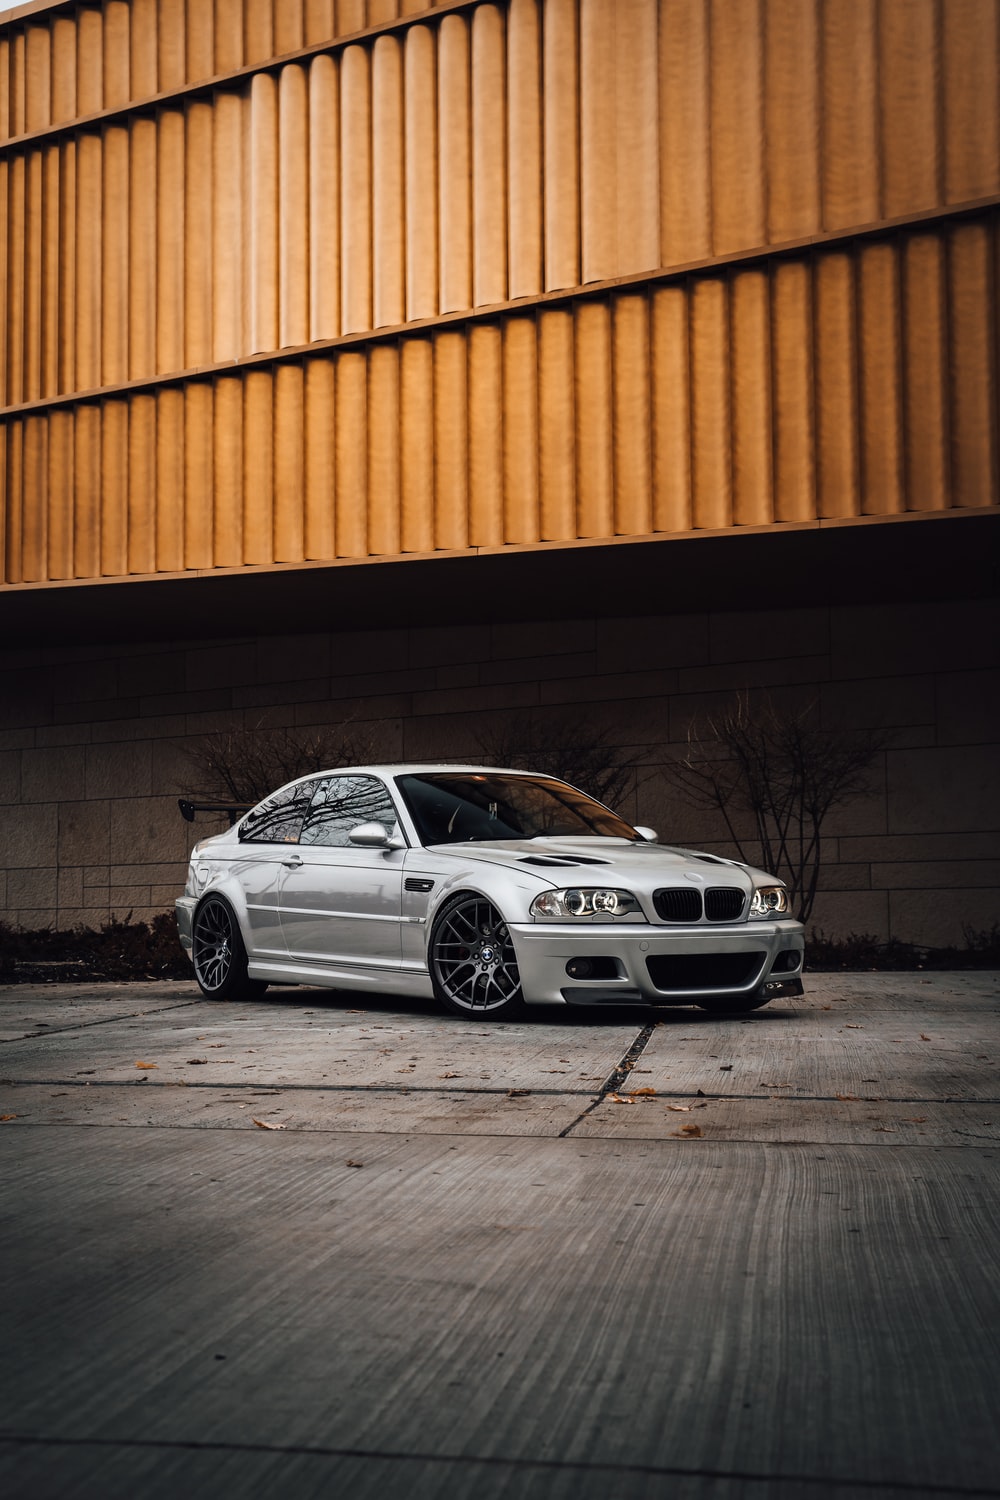 Bmw E46 Picture. Download Free Image